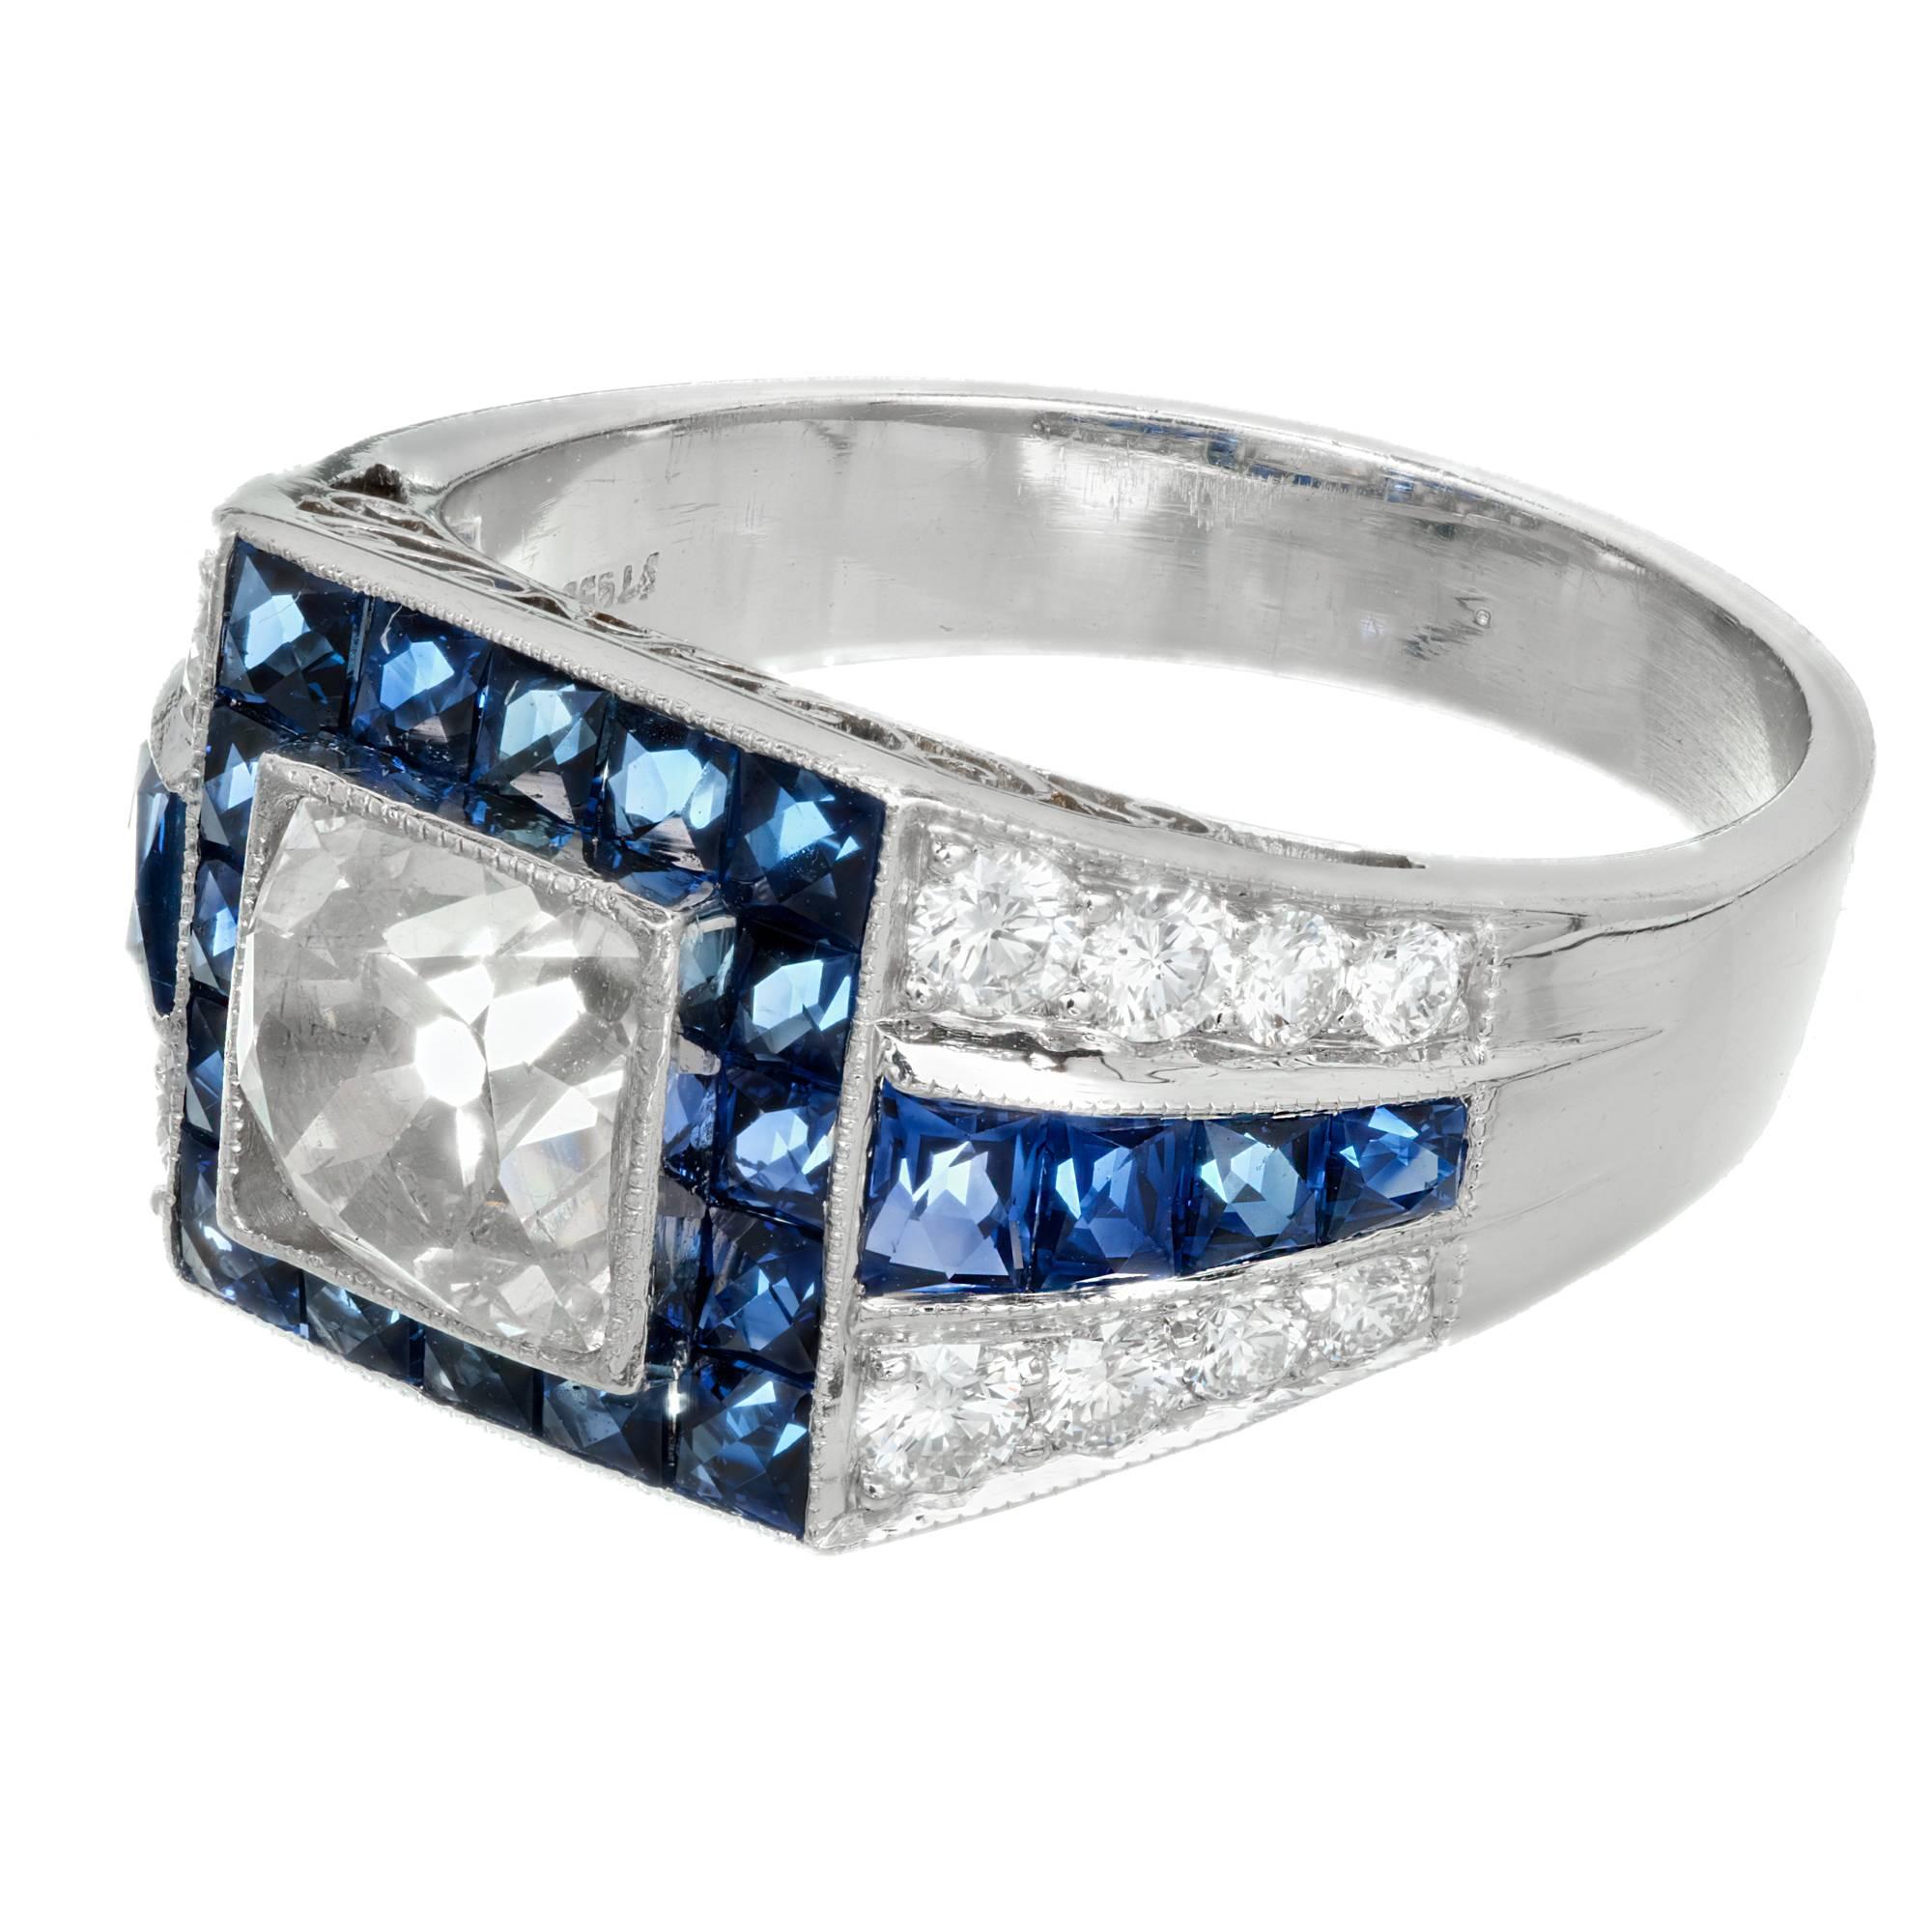 Art Deco diamond and sapphire engagement ring. EGL certified 1.48ct antique cushion French cut  center diamond with a halo of blue Sapphires with French calibre cut tops in a platinum setting with sapphire and round accent diamonds. 

1 antique